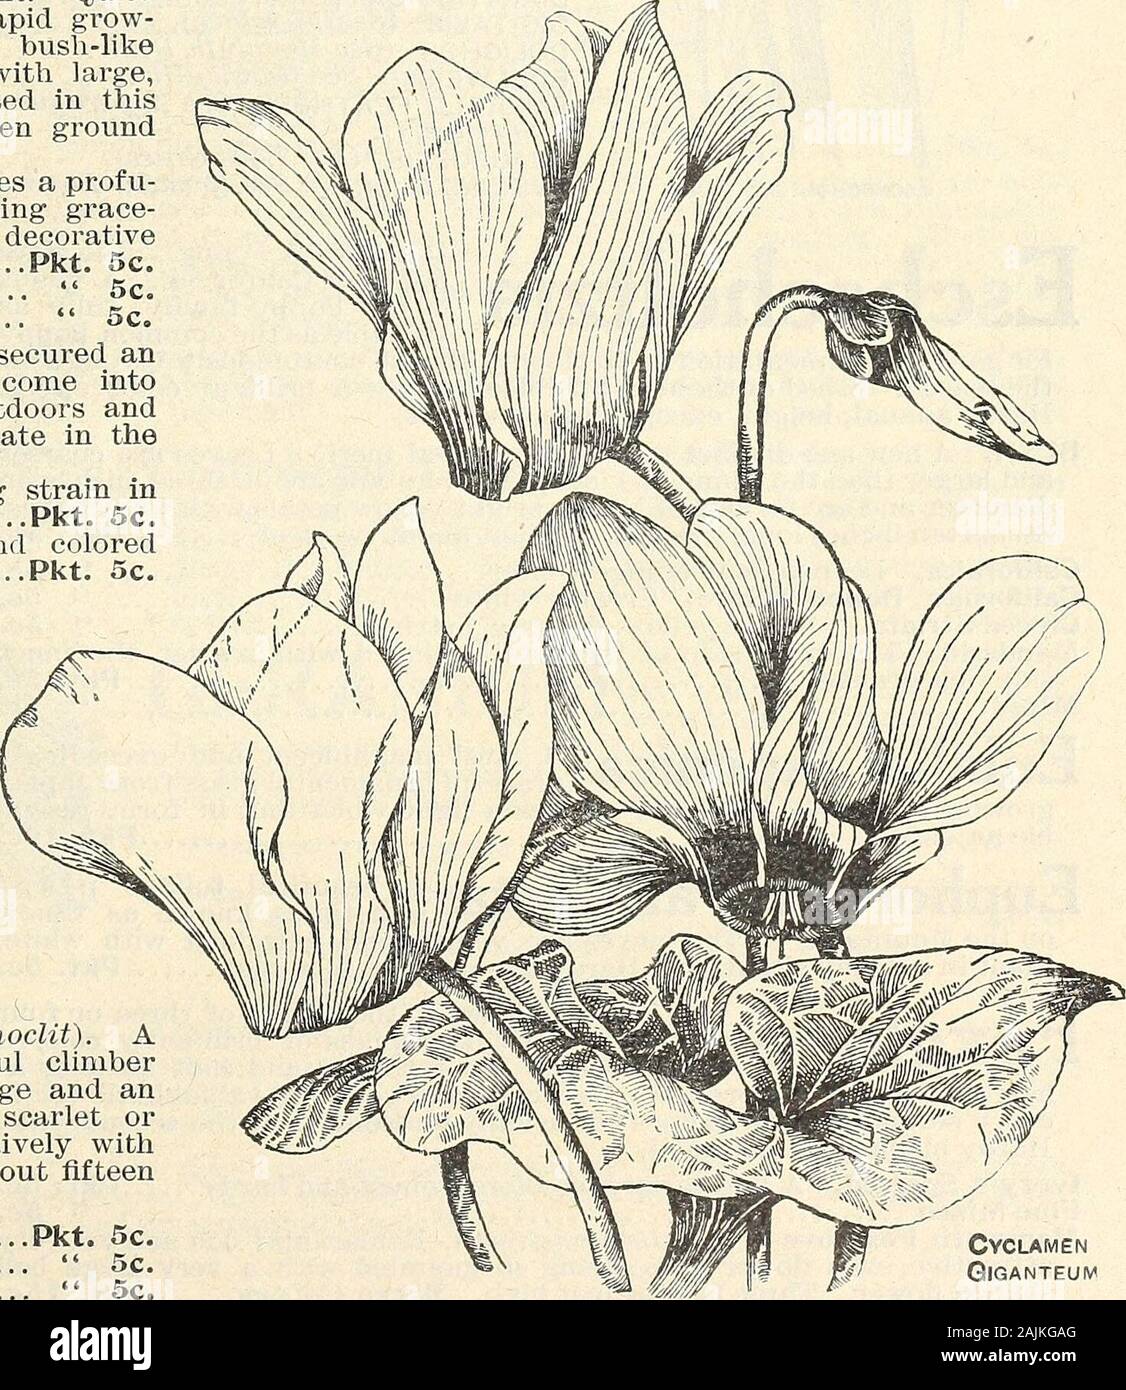 Seed annual 1908 . wn. An early flowering strain inwhich all the flowers are white Pkt. 5c. Early Flowering, Mixed. Both white and colored flowers Pkt. 5c. CUCURBITA—(See Gourd). Well known anduniversally admir-ed tuberous rootedplants producing exceedingly handsomered and white flowers. Seed sown in spring,by autumn will produce a little bulb whichif potted will bloom the following spring.Tender perennial; one foot high. Persicum, mixed. Of great beauty andmany colors Pkt. 15c. Persicum giganteum, mixed. Characteriz-ed by beautiful foliage and profuse bloom;each flower is from two to two and Stock Photo